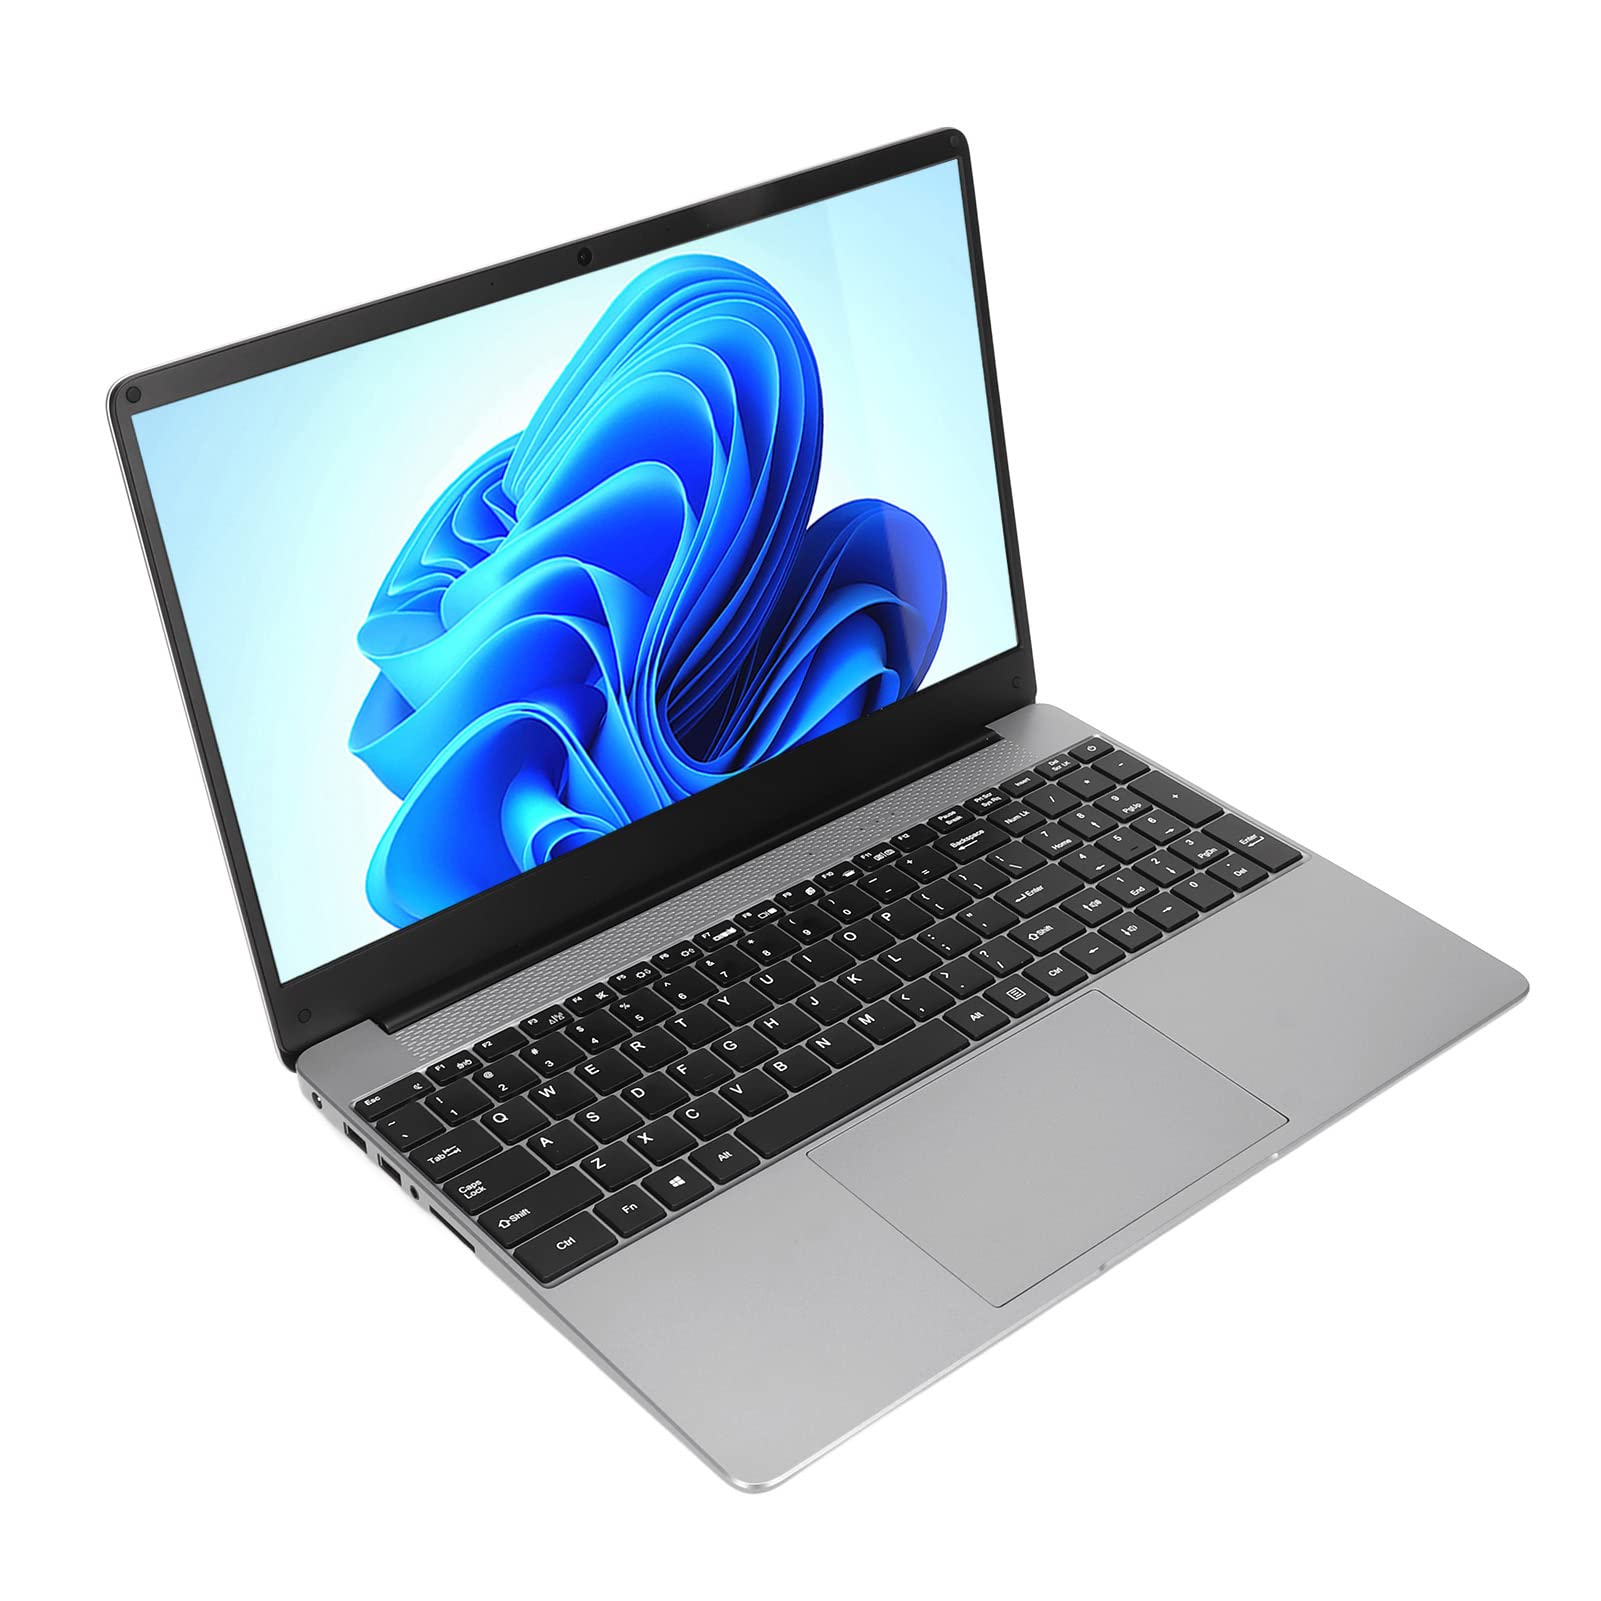 Tangxi Windows10 Computer Laptop, 15.6in HD Screen 1920x1080 Slim Notebook, I7 6th 4 Cores, 8GB RAM 1TB, 802.11.ac 2.4G 5GHz WiFi, Stereo Dual Speakers, Silver Gray Business Computer